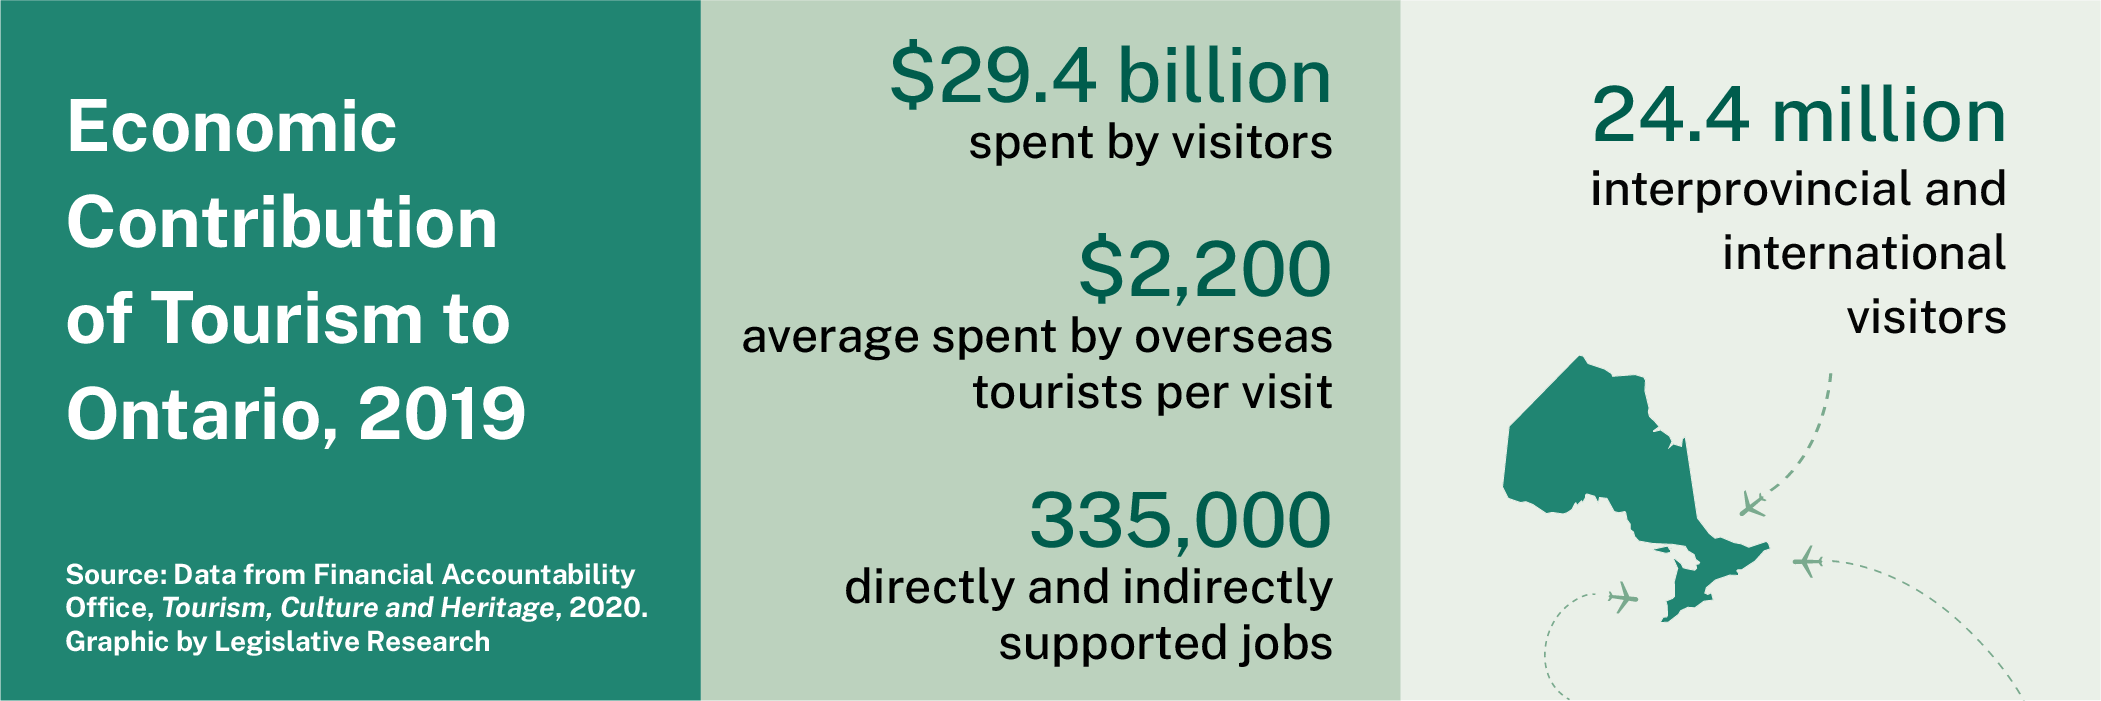 According to data from the Financial Accountability Office, tourists spent $29.4 billion in 2019, with overseas tourists spending on average $2,200 per visit. The province attracted 24.4 million international and interprovincial visitors and the industry directly and indirectly supported 335,000 jobs.